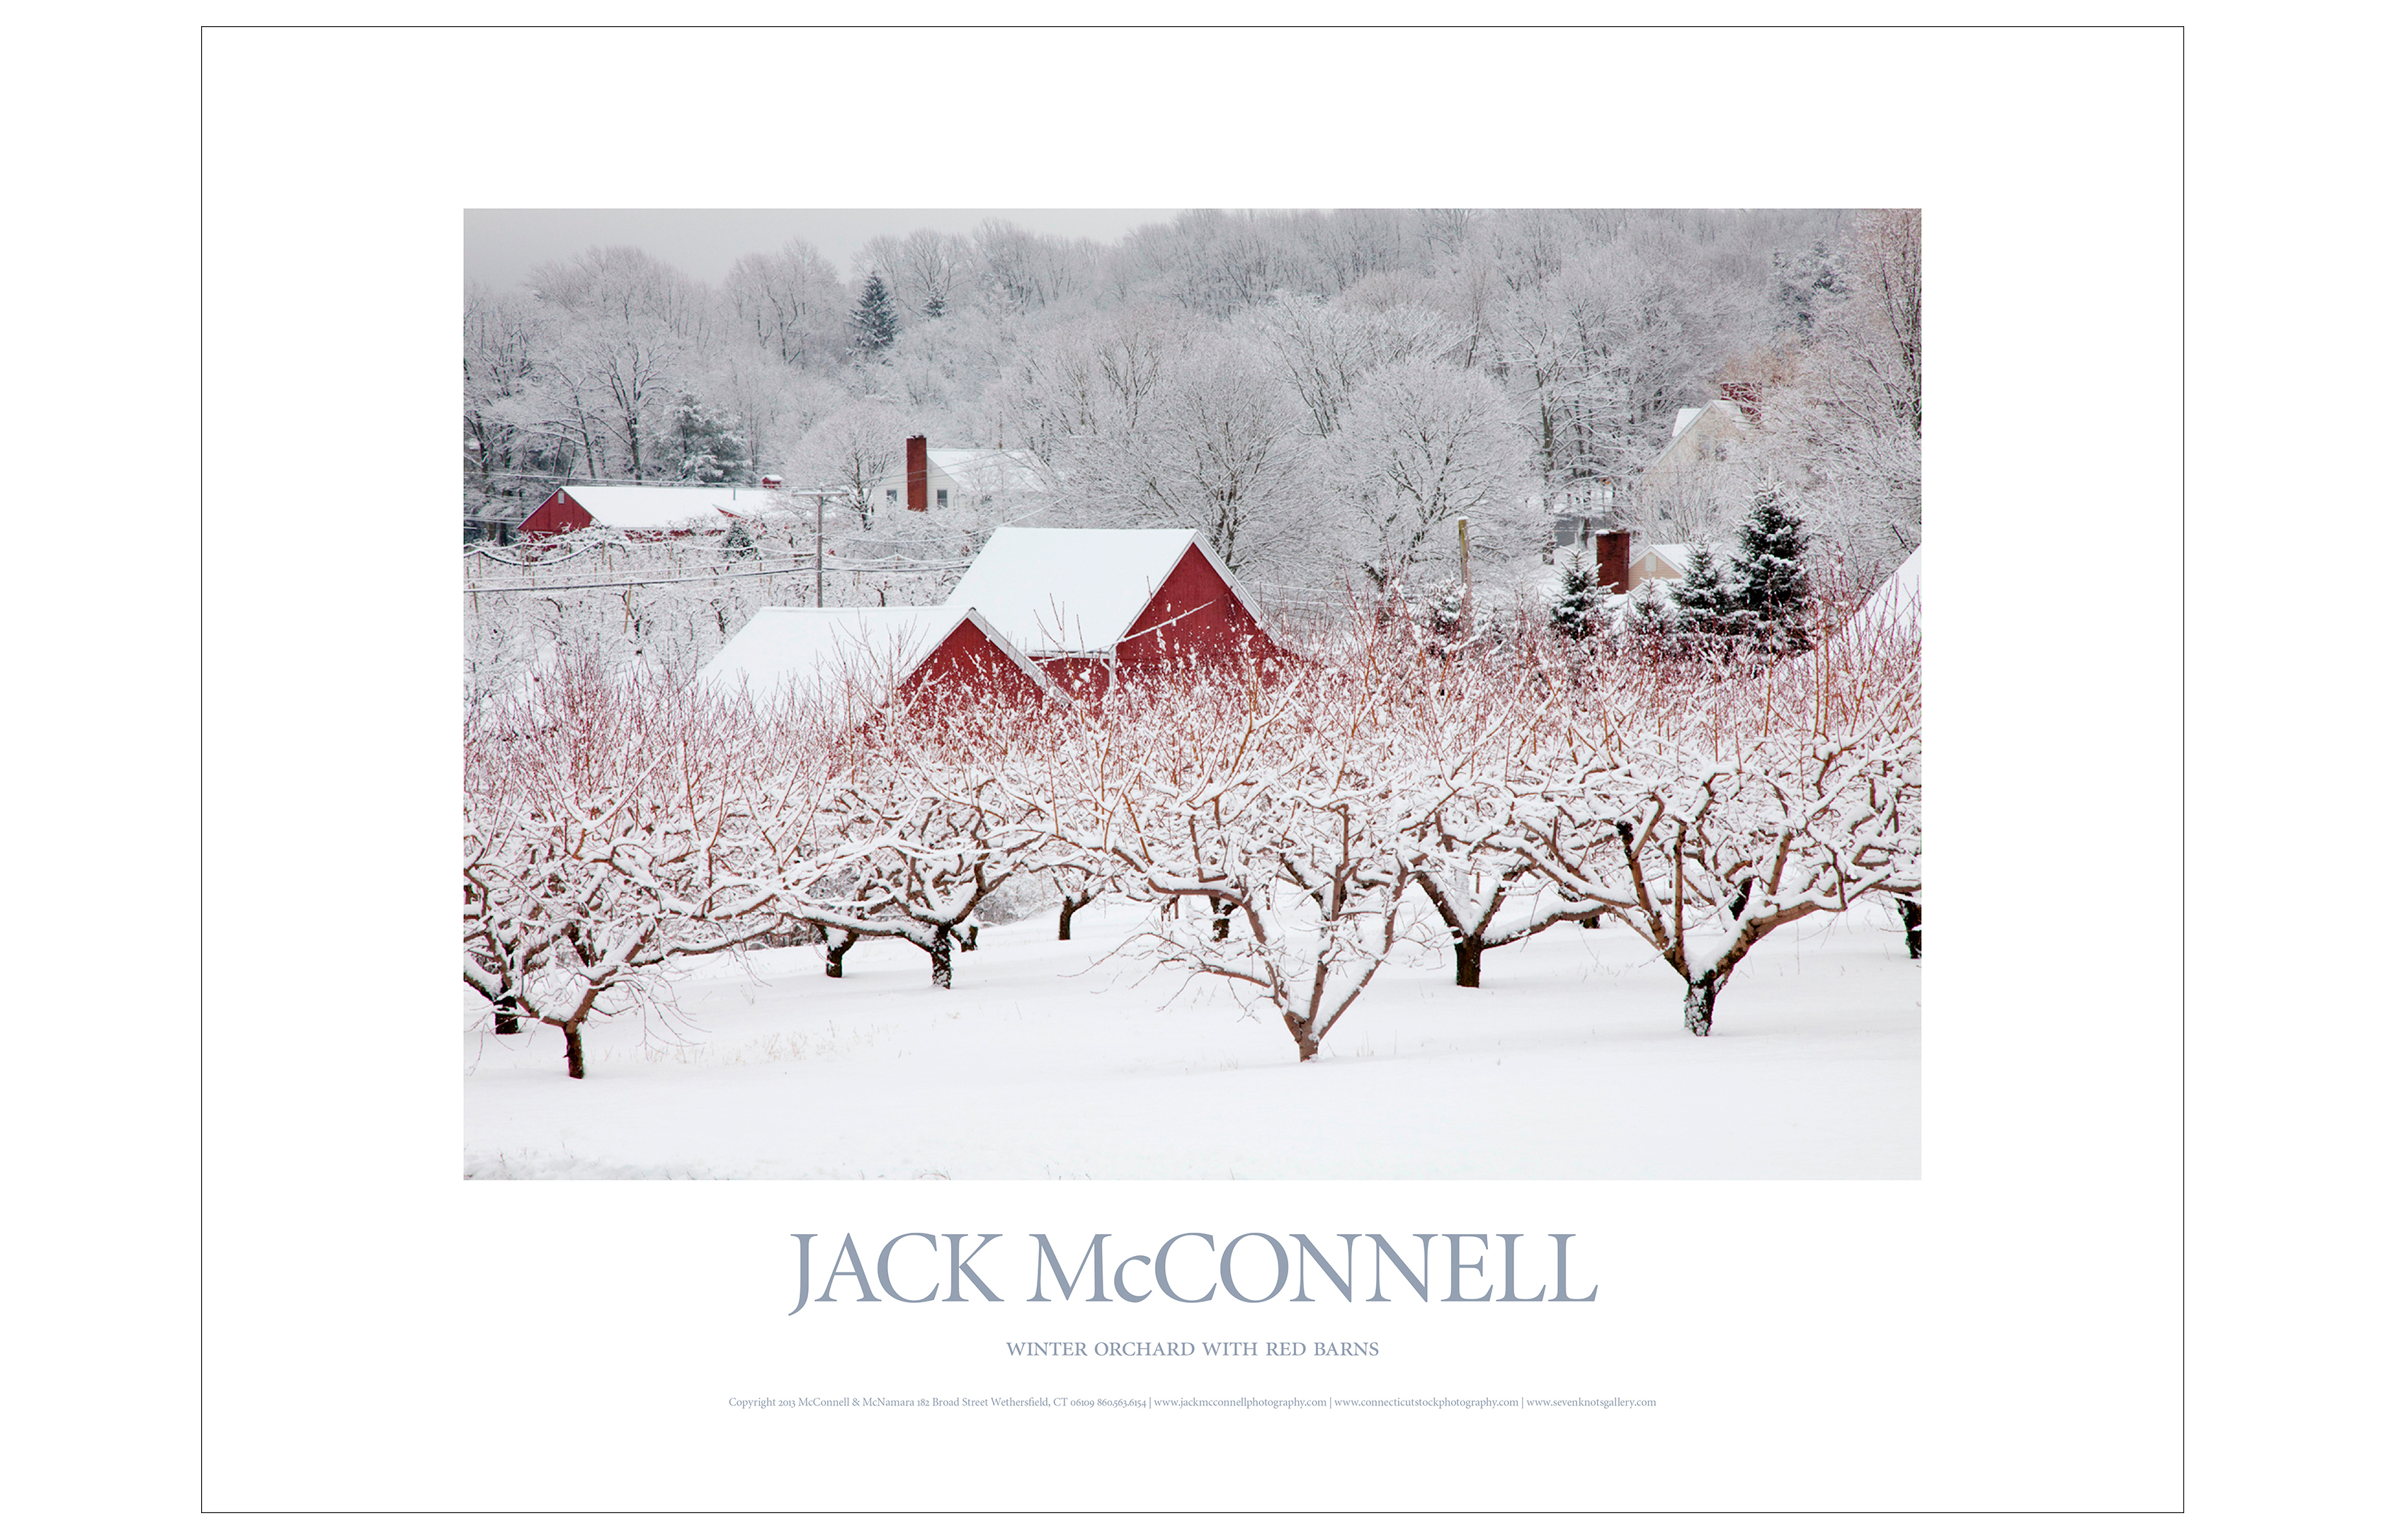 Winter Orchard With Red Barn